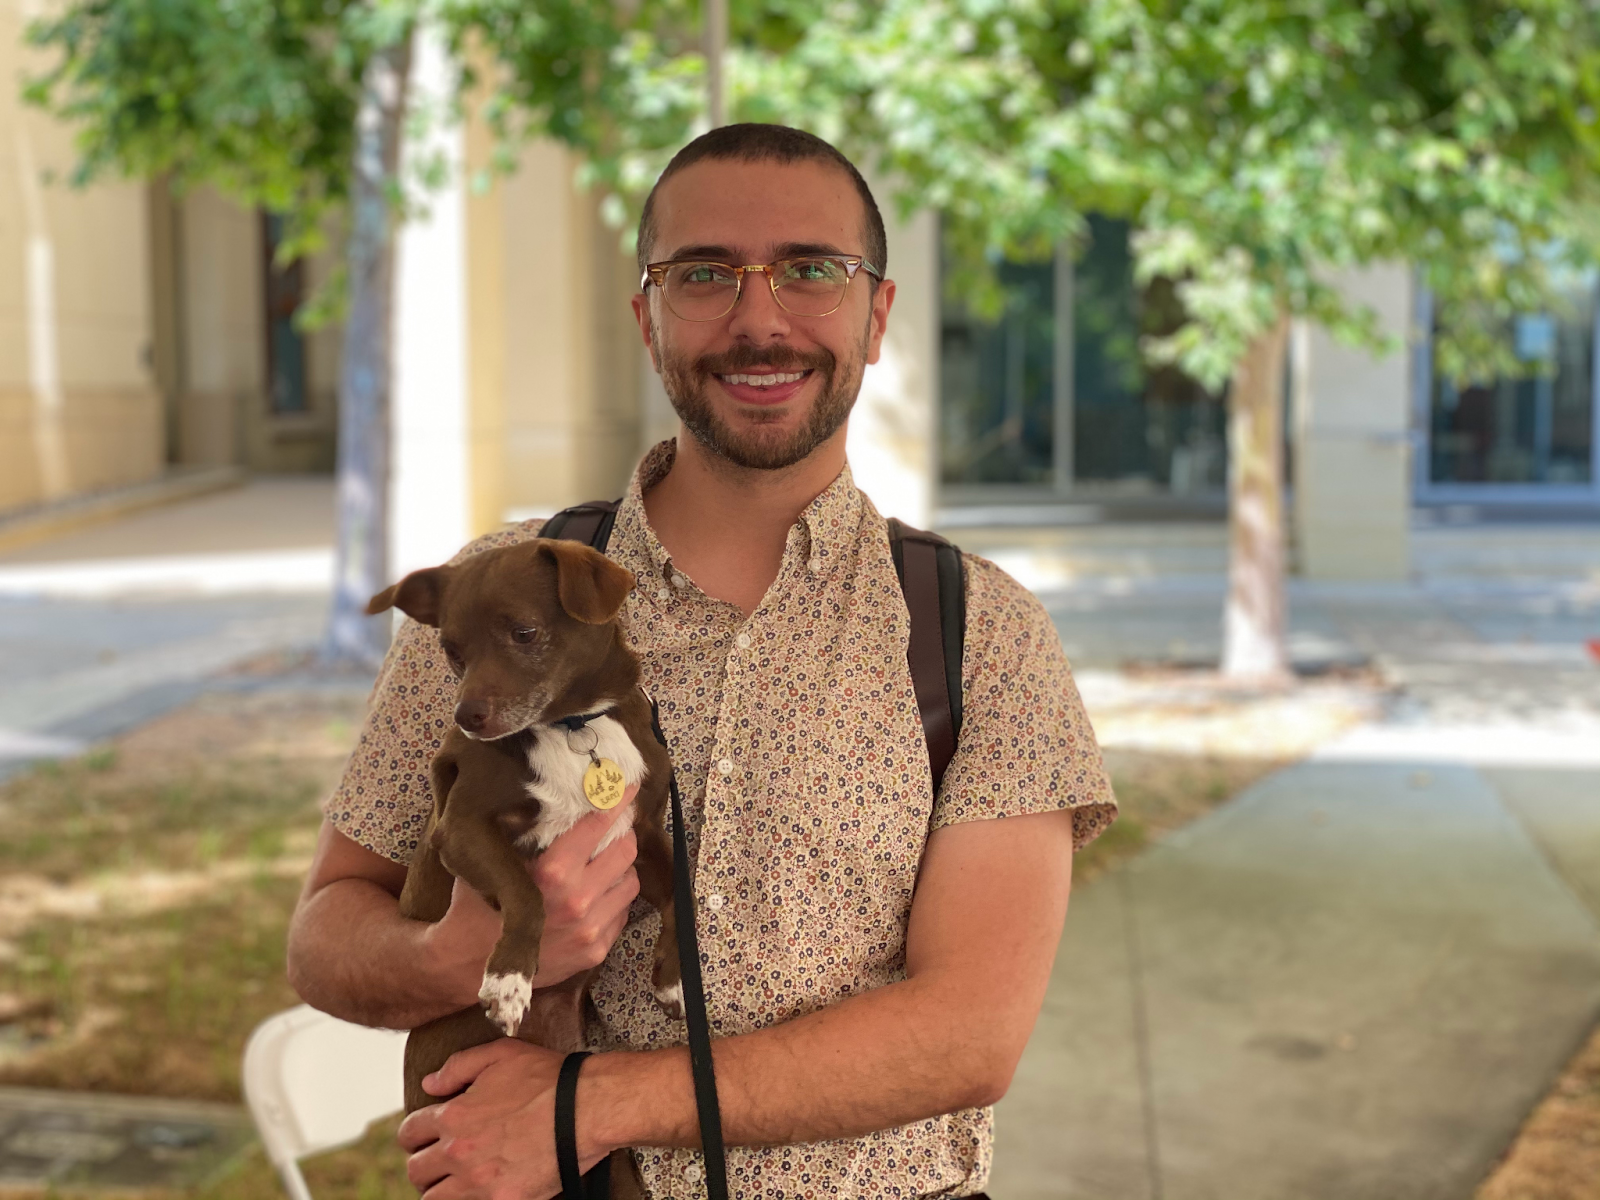 Stanford lecturer Max Ashton poses for a portrait holding his small dog Bjarki.